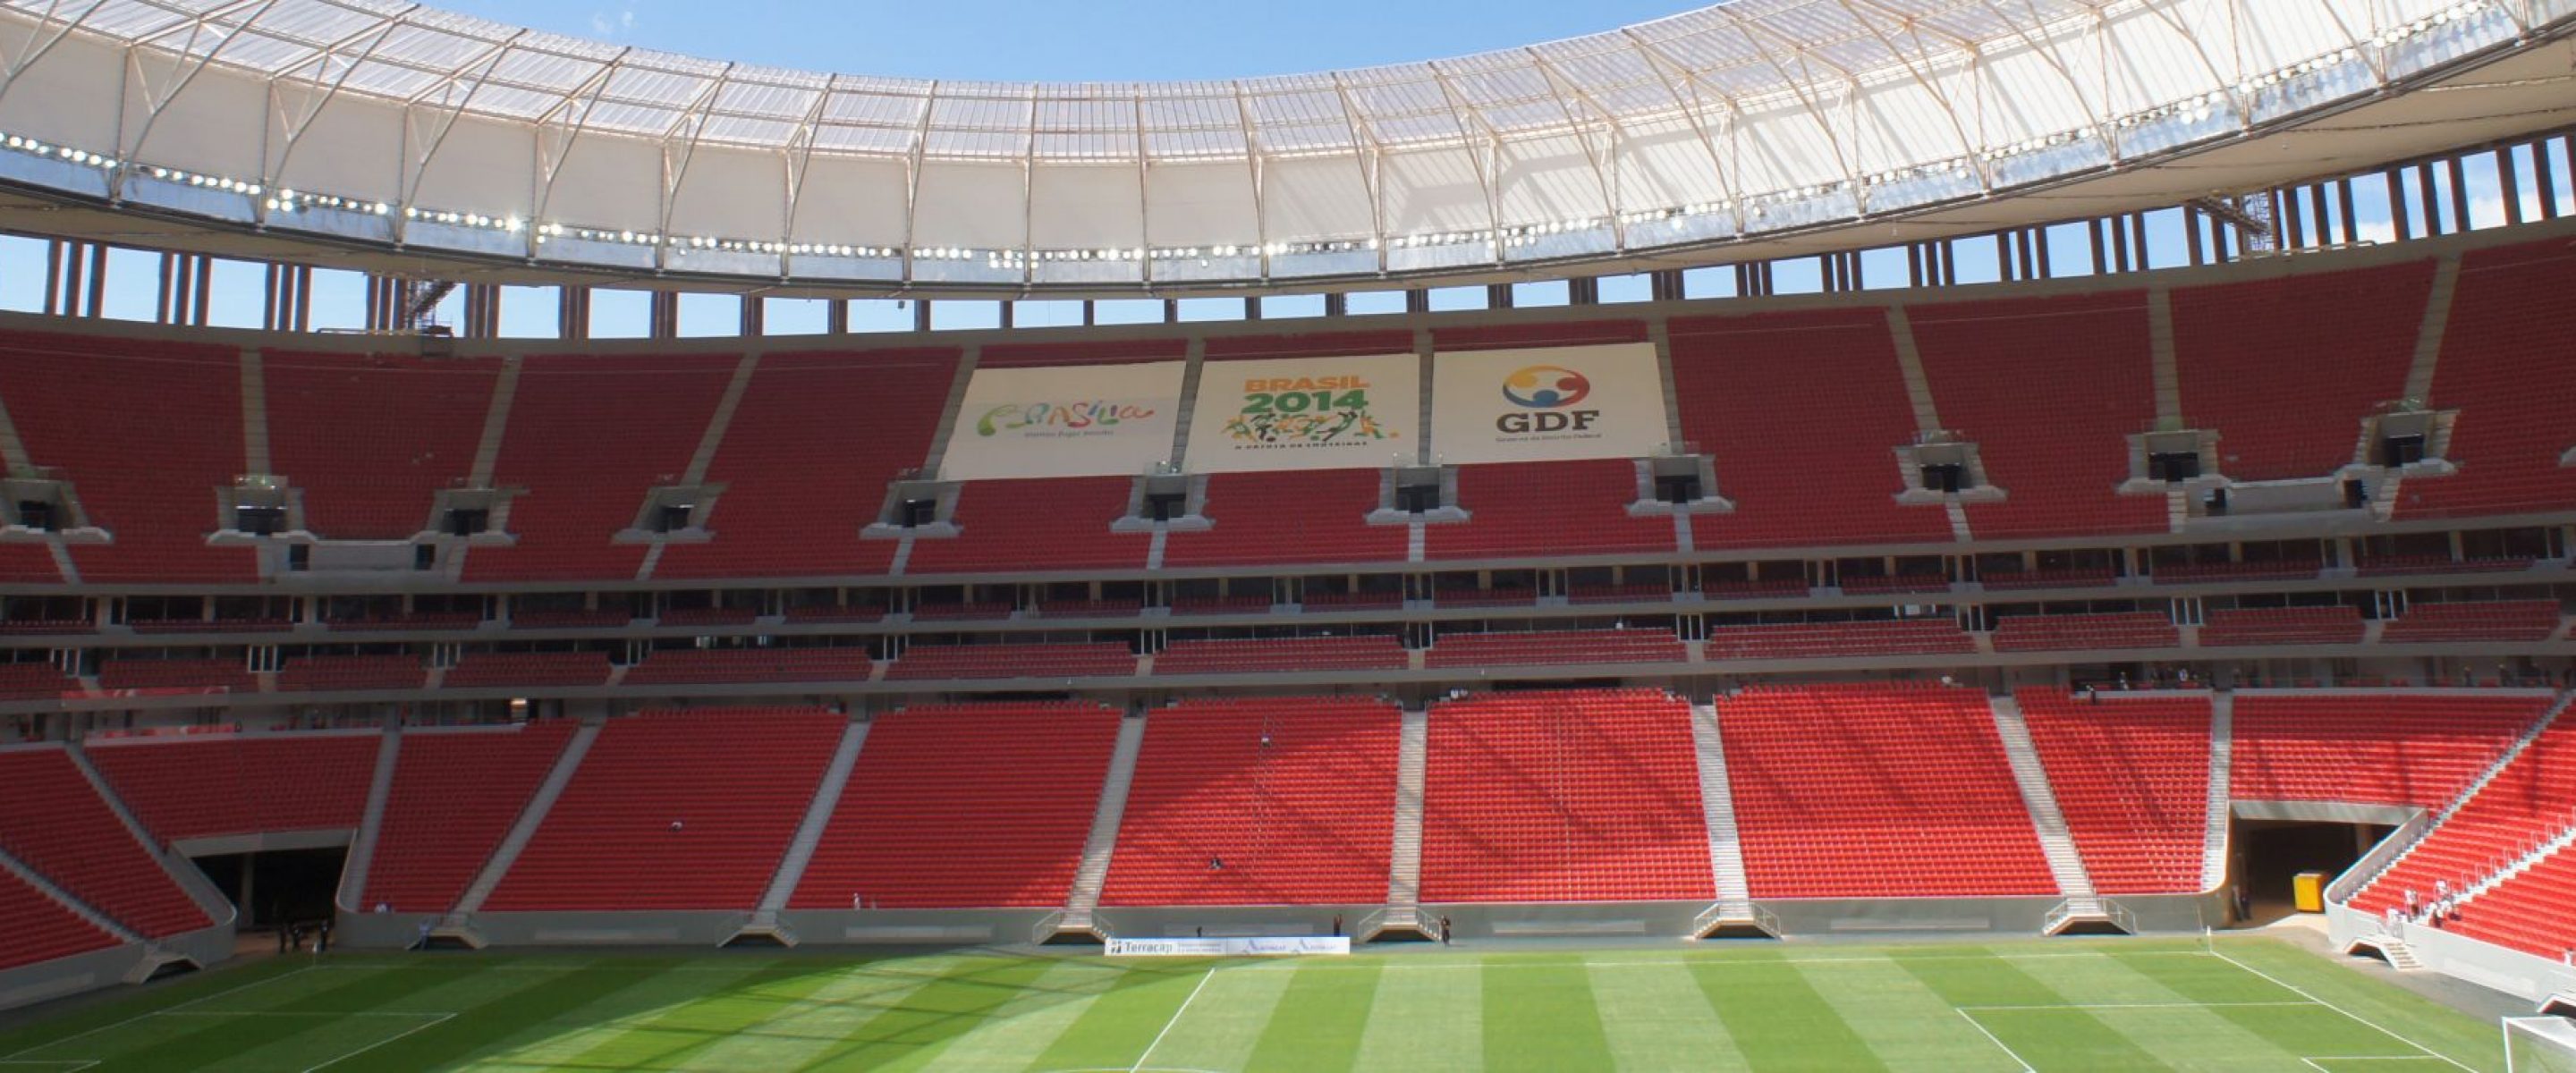 The company of Casimir Katz was providing the software for the planning of the football stadium for the World Cup in Brasília